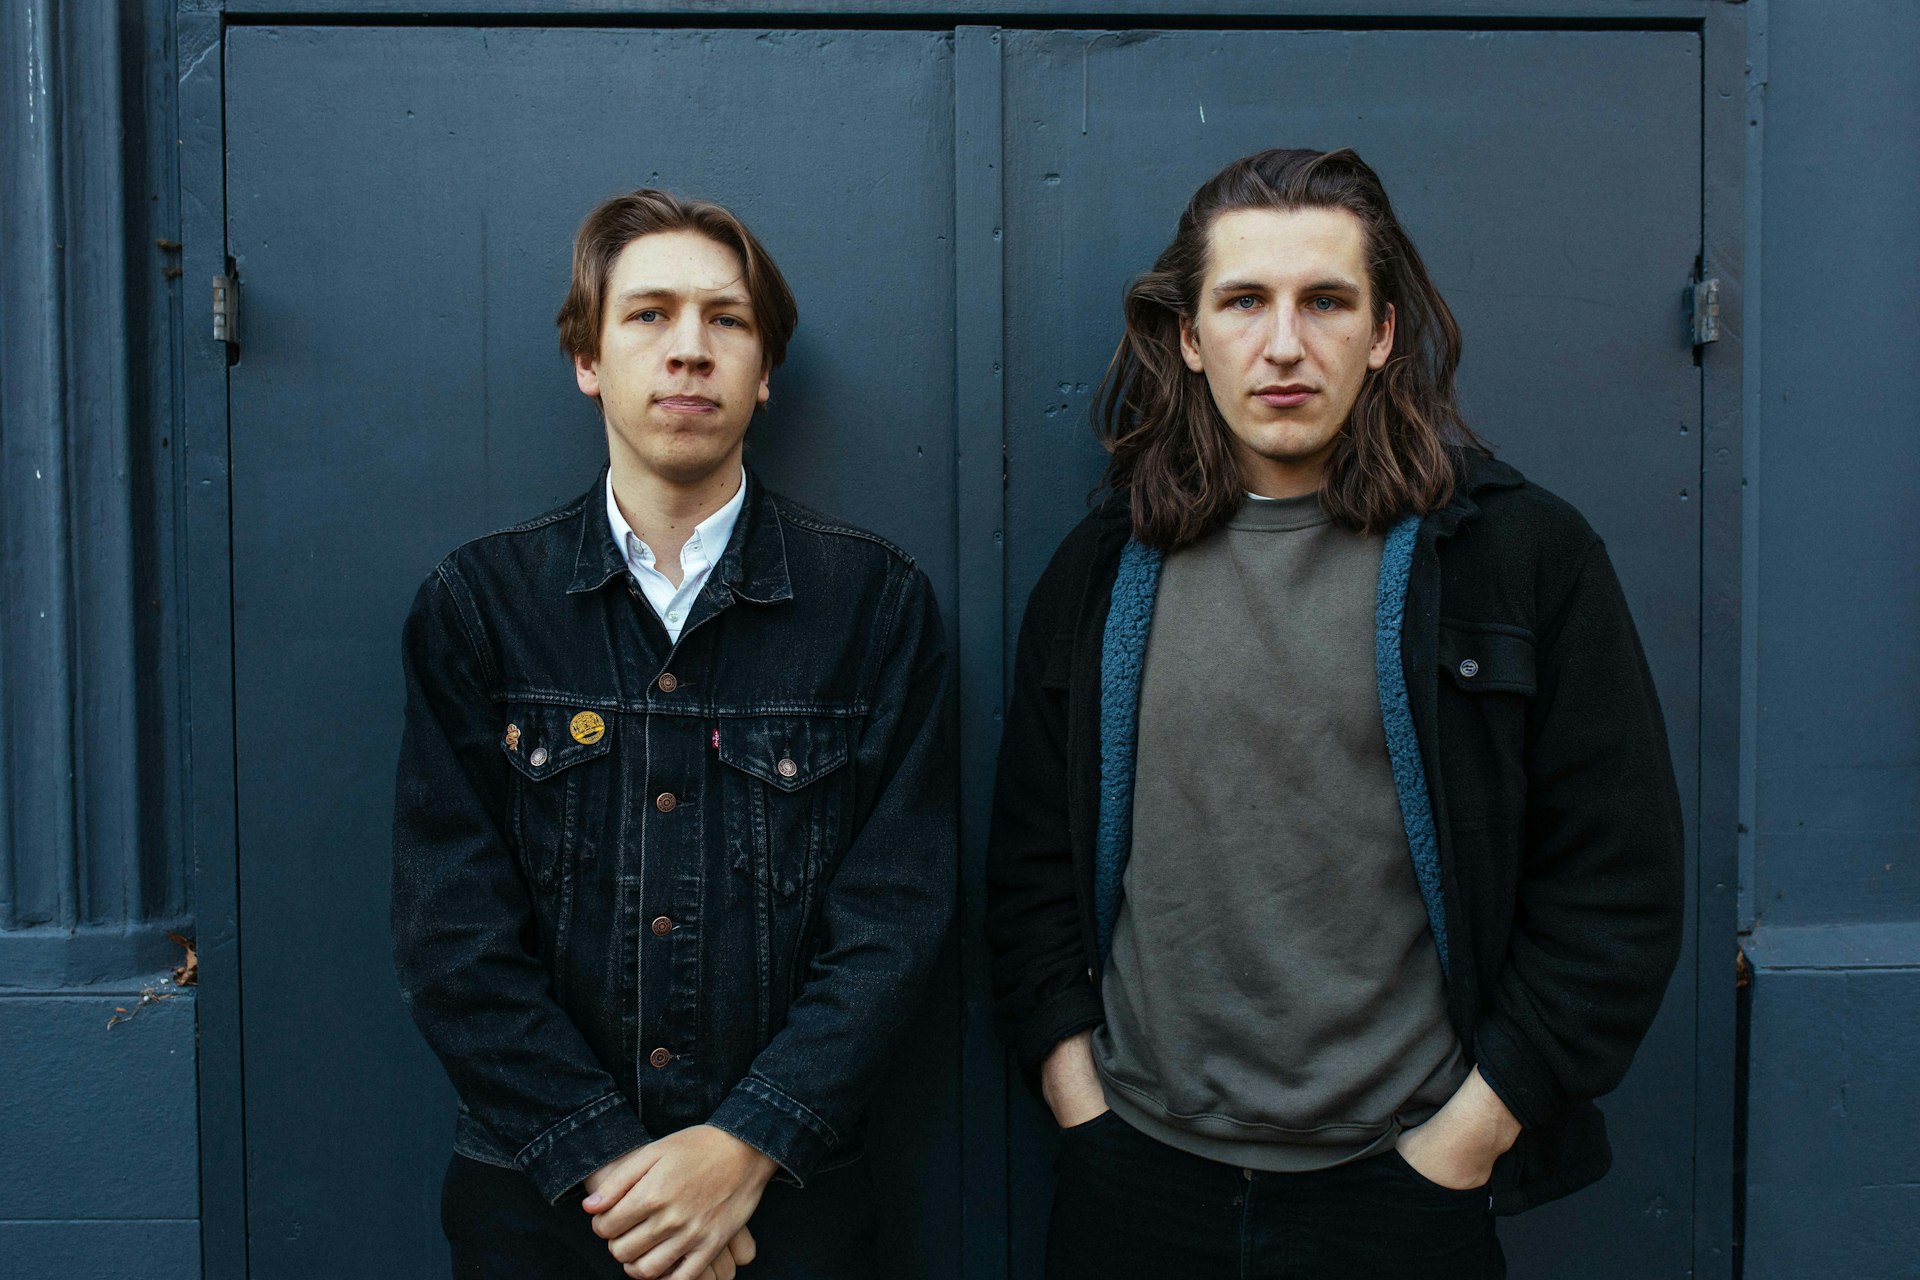 Drenge on slime, city boys and finding hope within the mess